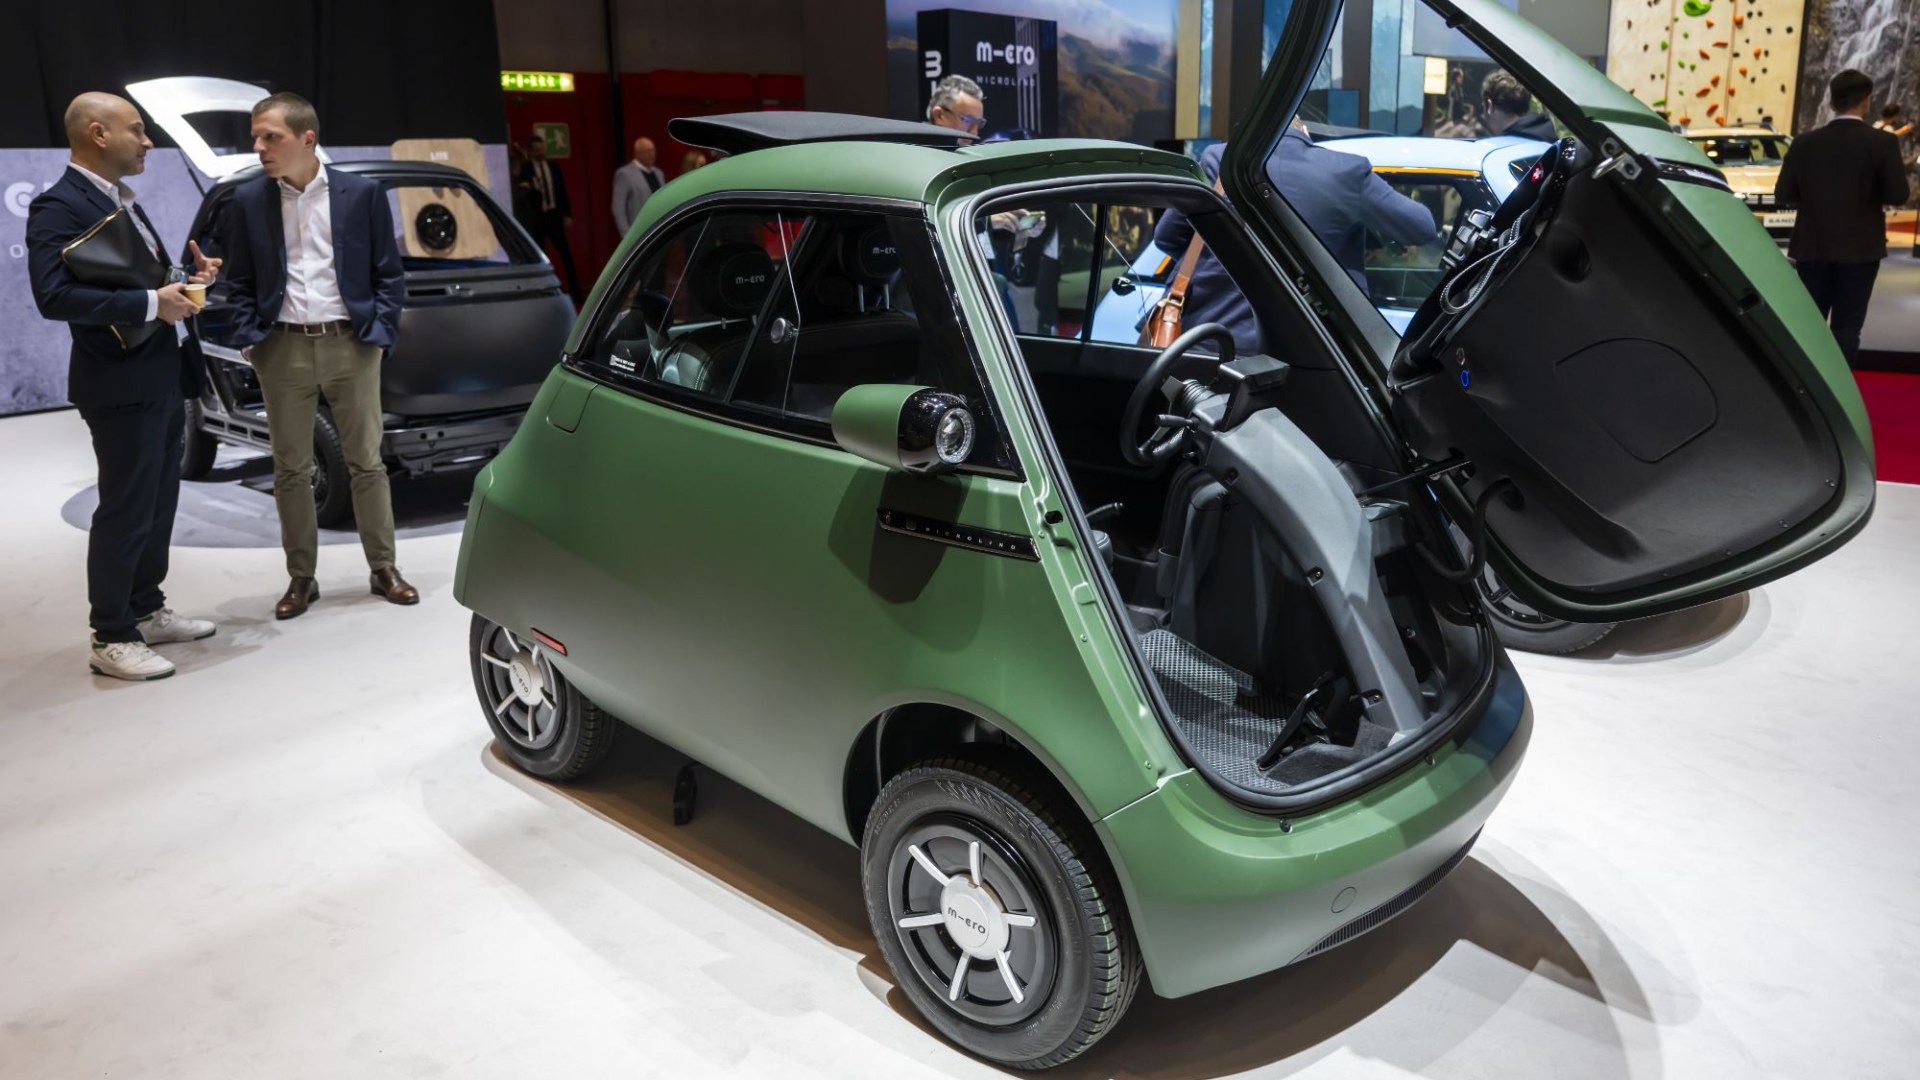 Inside the ‘miniature’ EV with top speed of 56mph coming to the UK ‘imminently’ [Video]